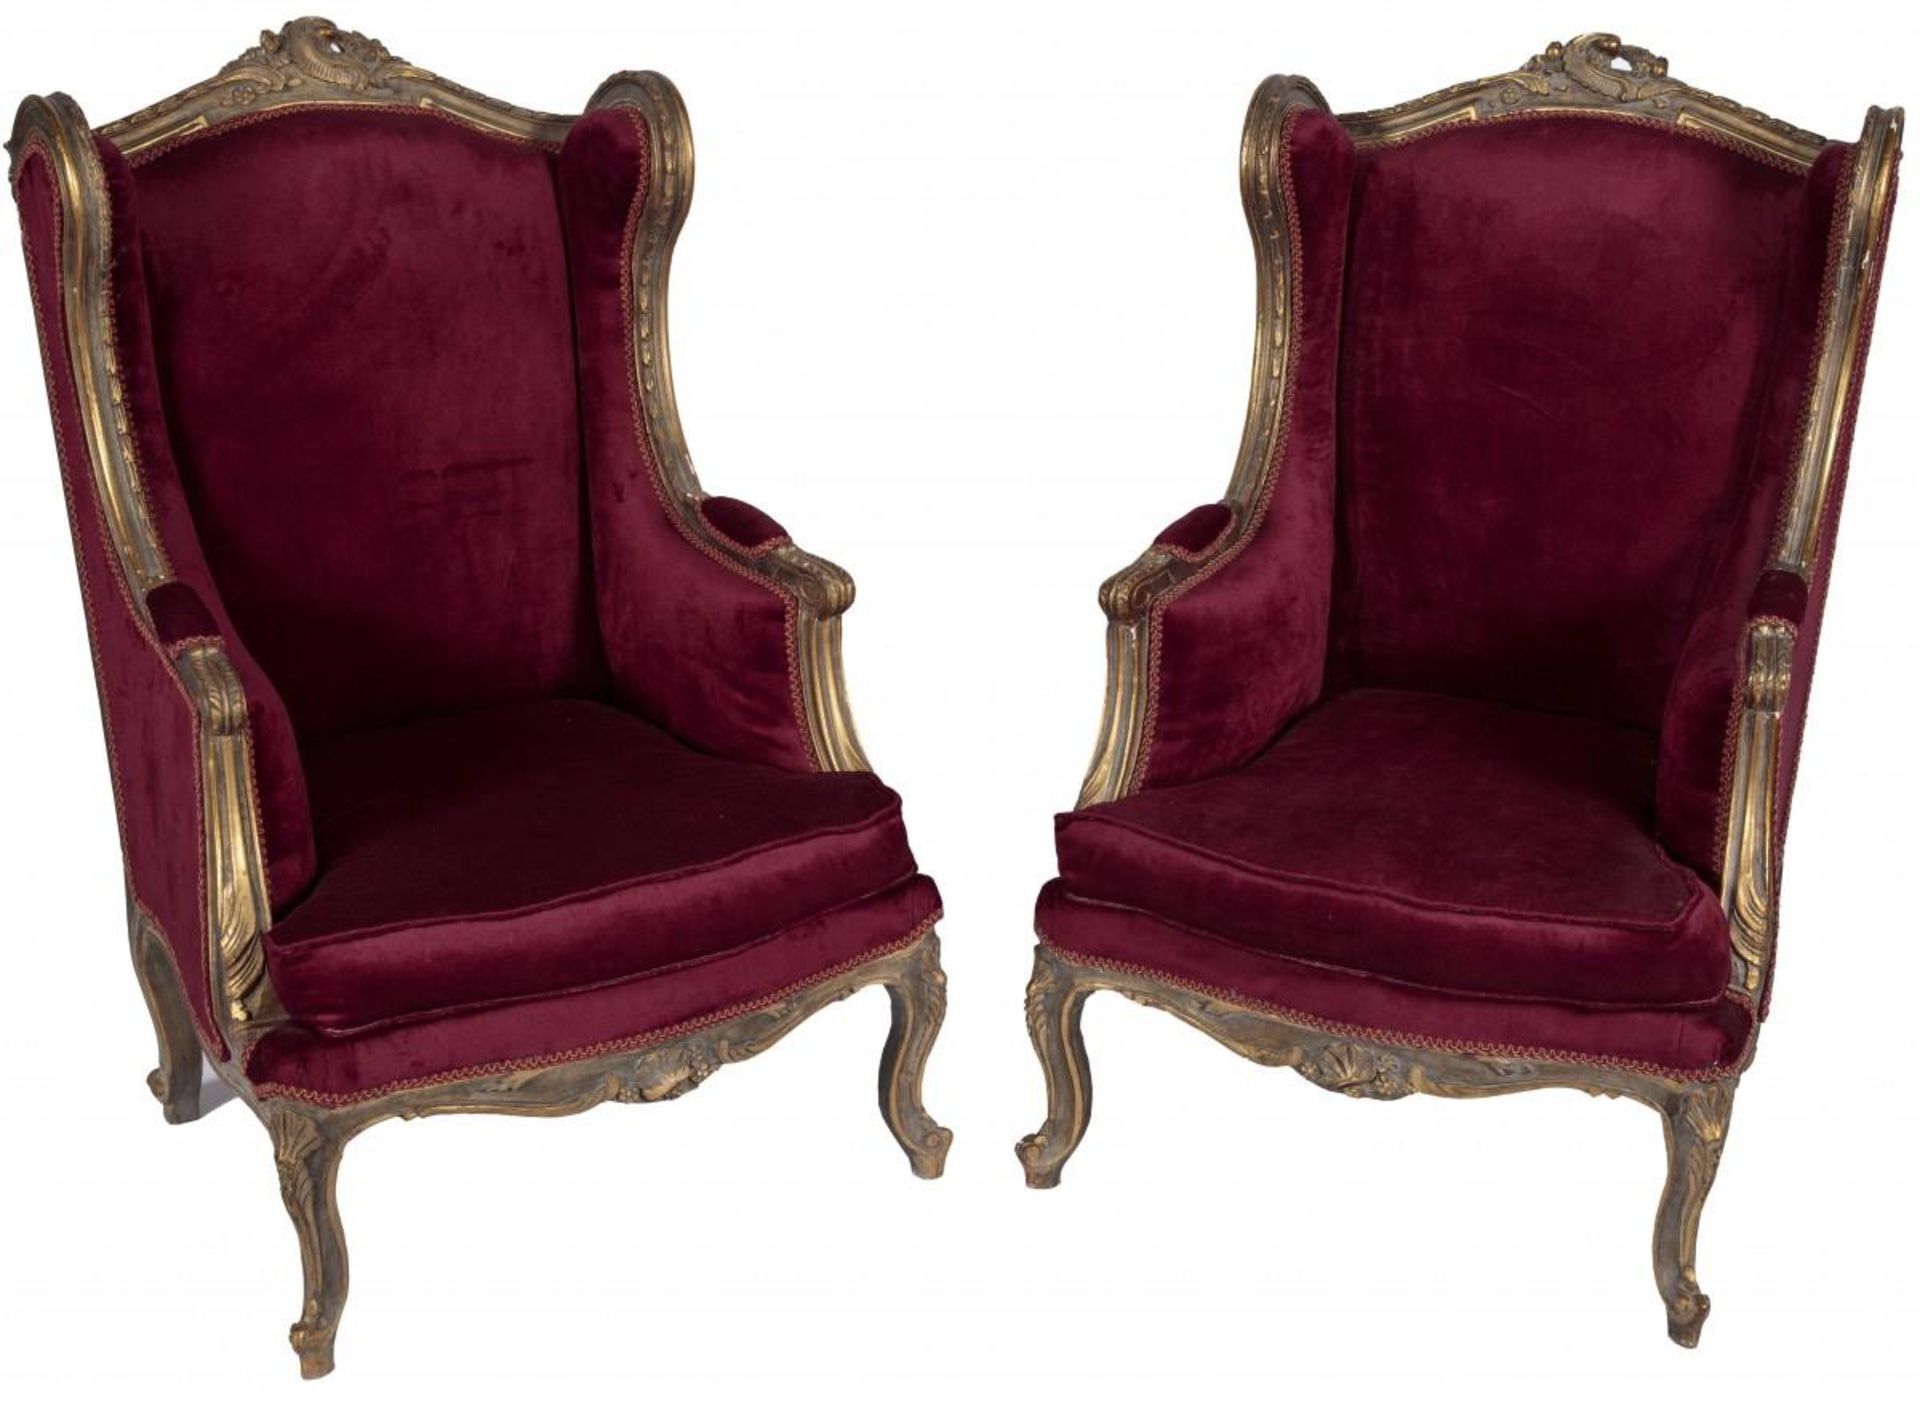 A set of (2) neo-transition style wingback chairs, France, 20th century.